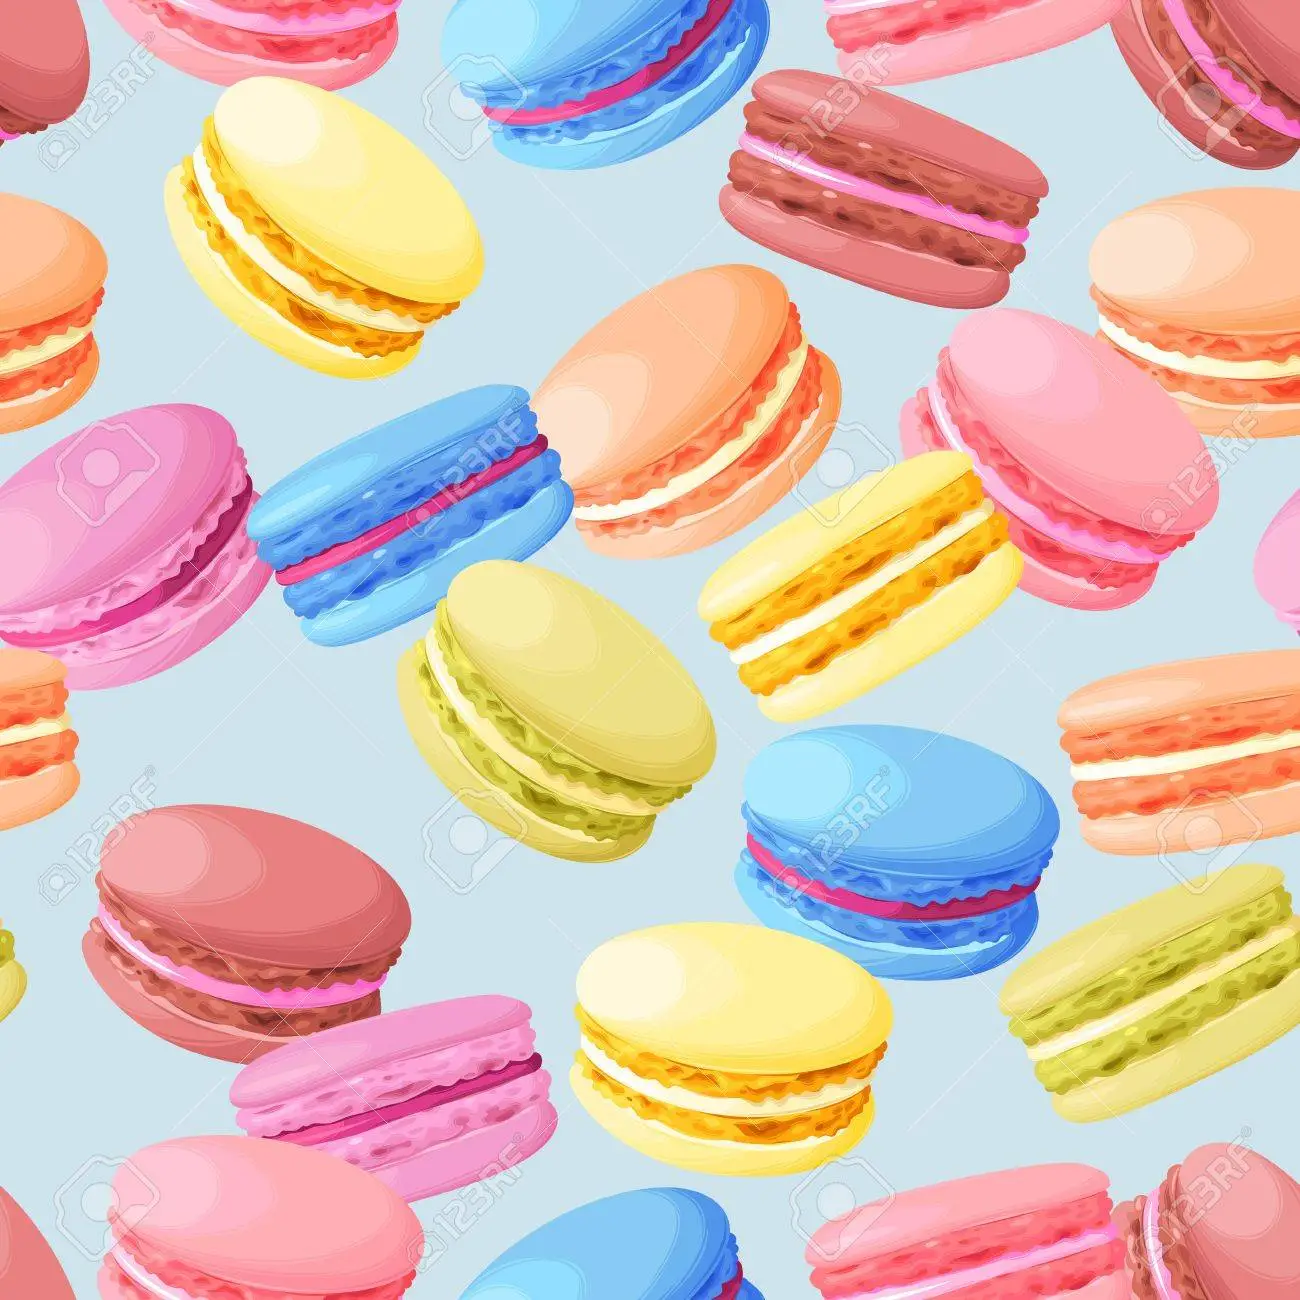 Pastel cute macarons vintage vector seamless background royalty free svg cliparts vectors and stock illustration image